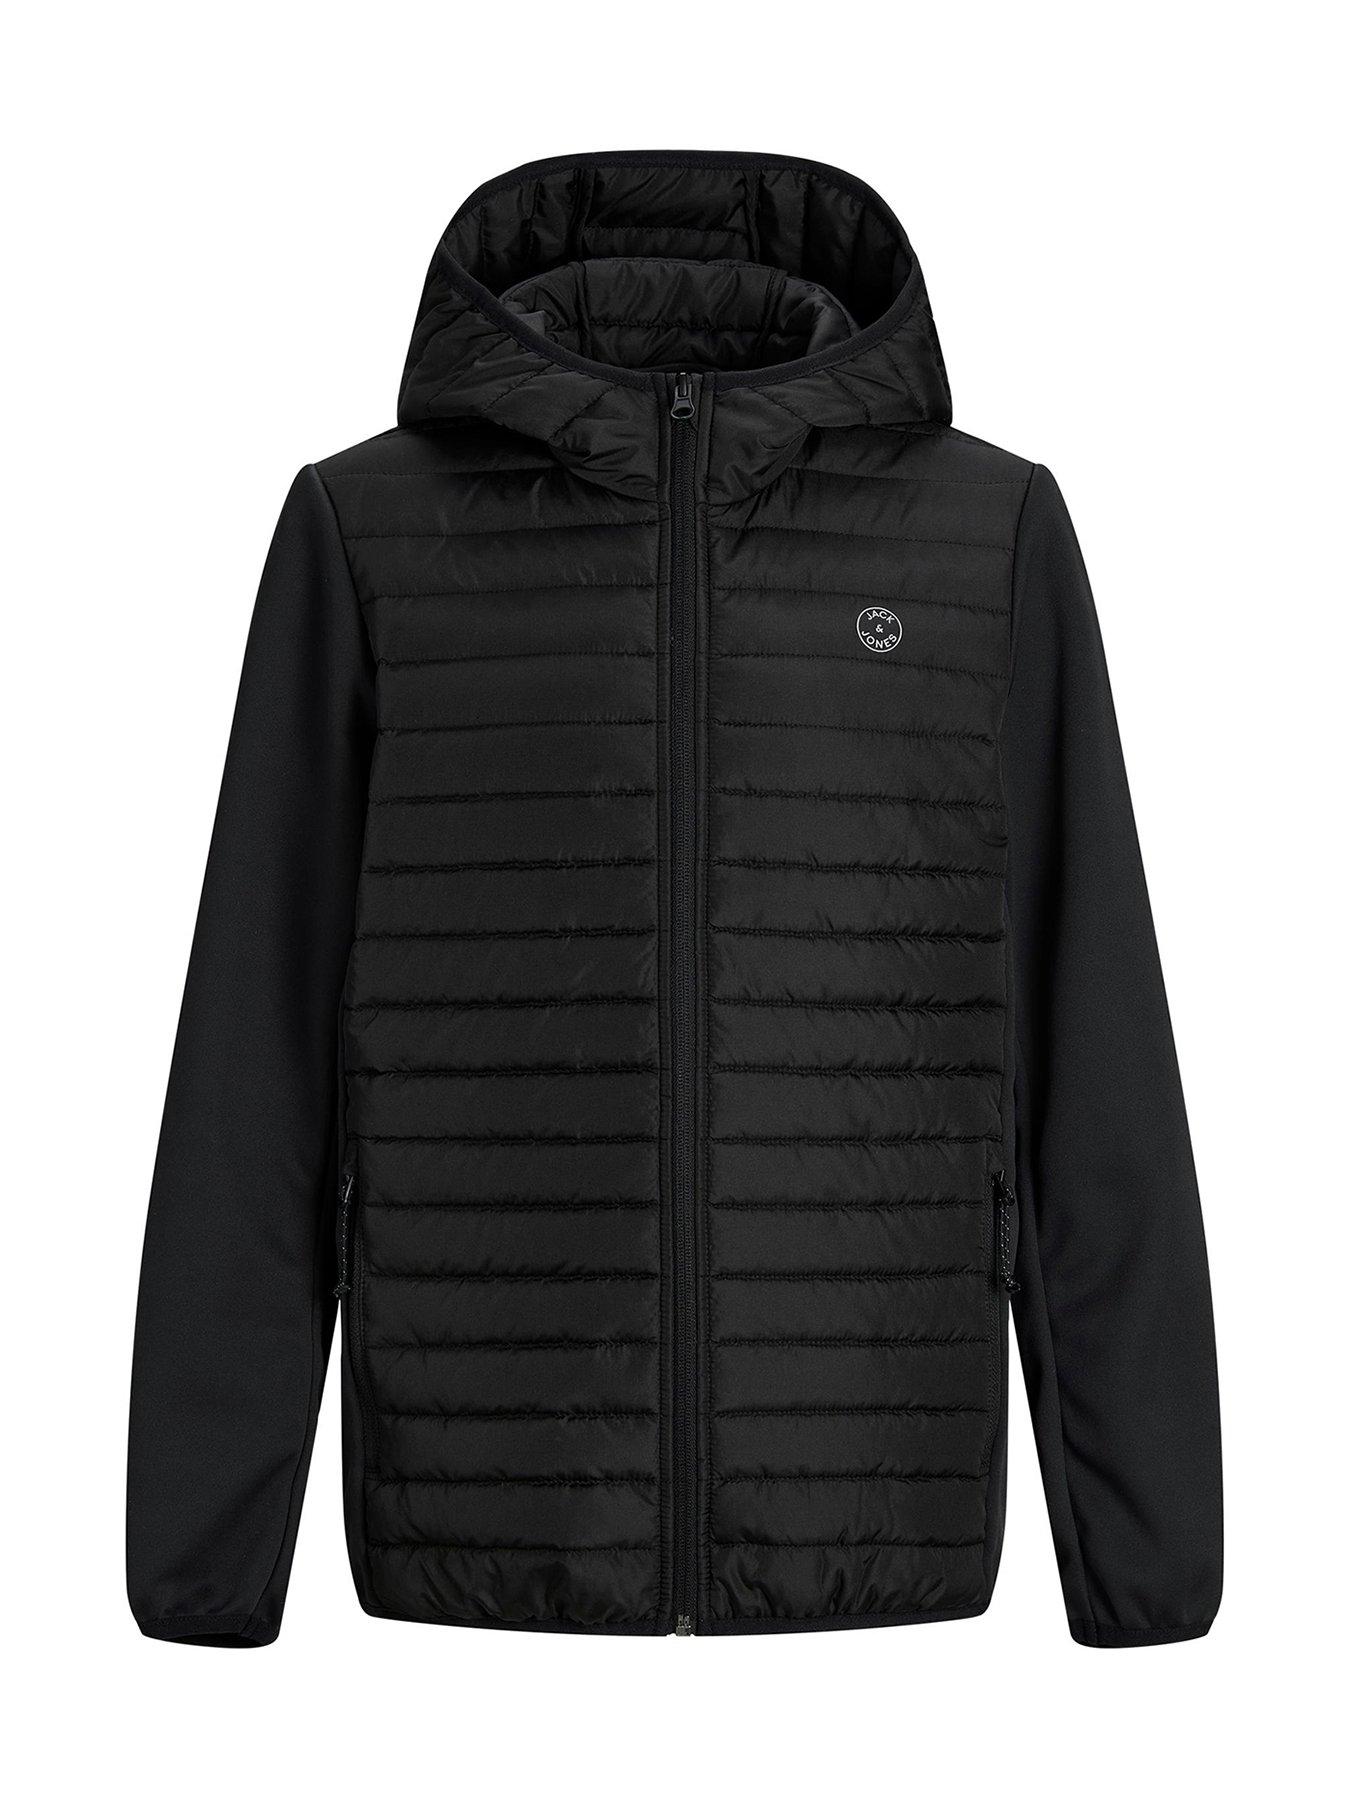 Boys Clothes Boys Multi Quilted Jacket - Black